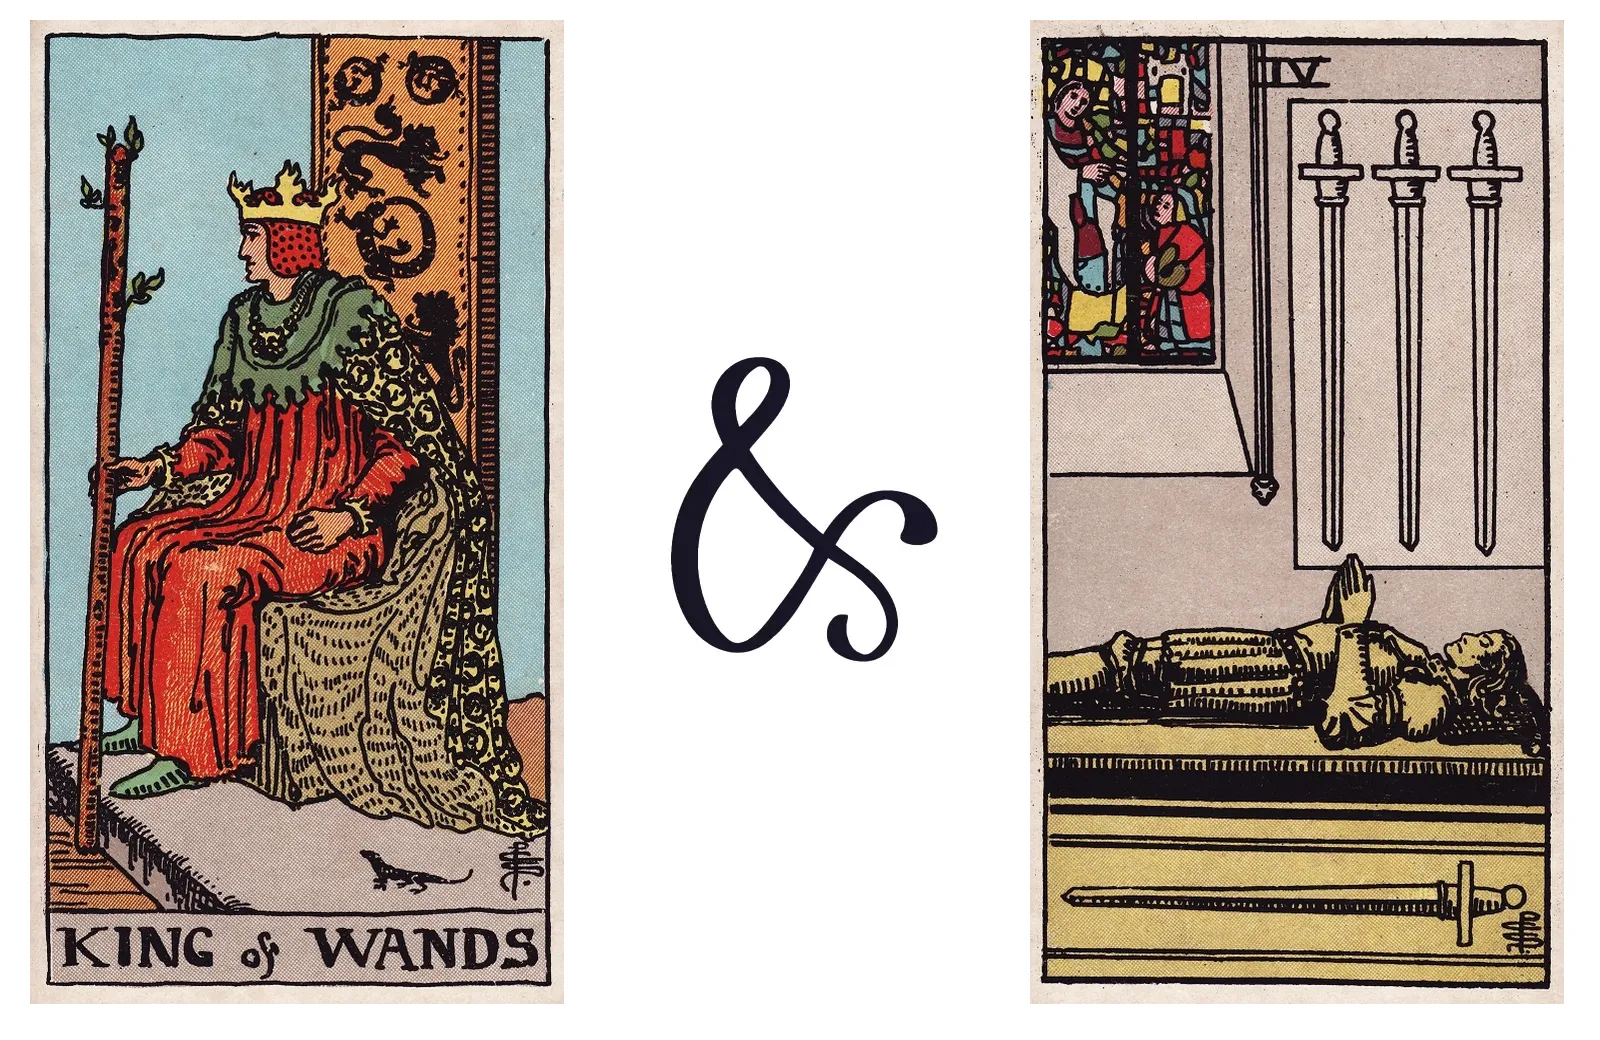 King of Wands and Four of Swords